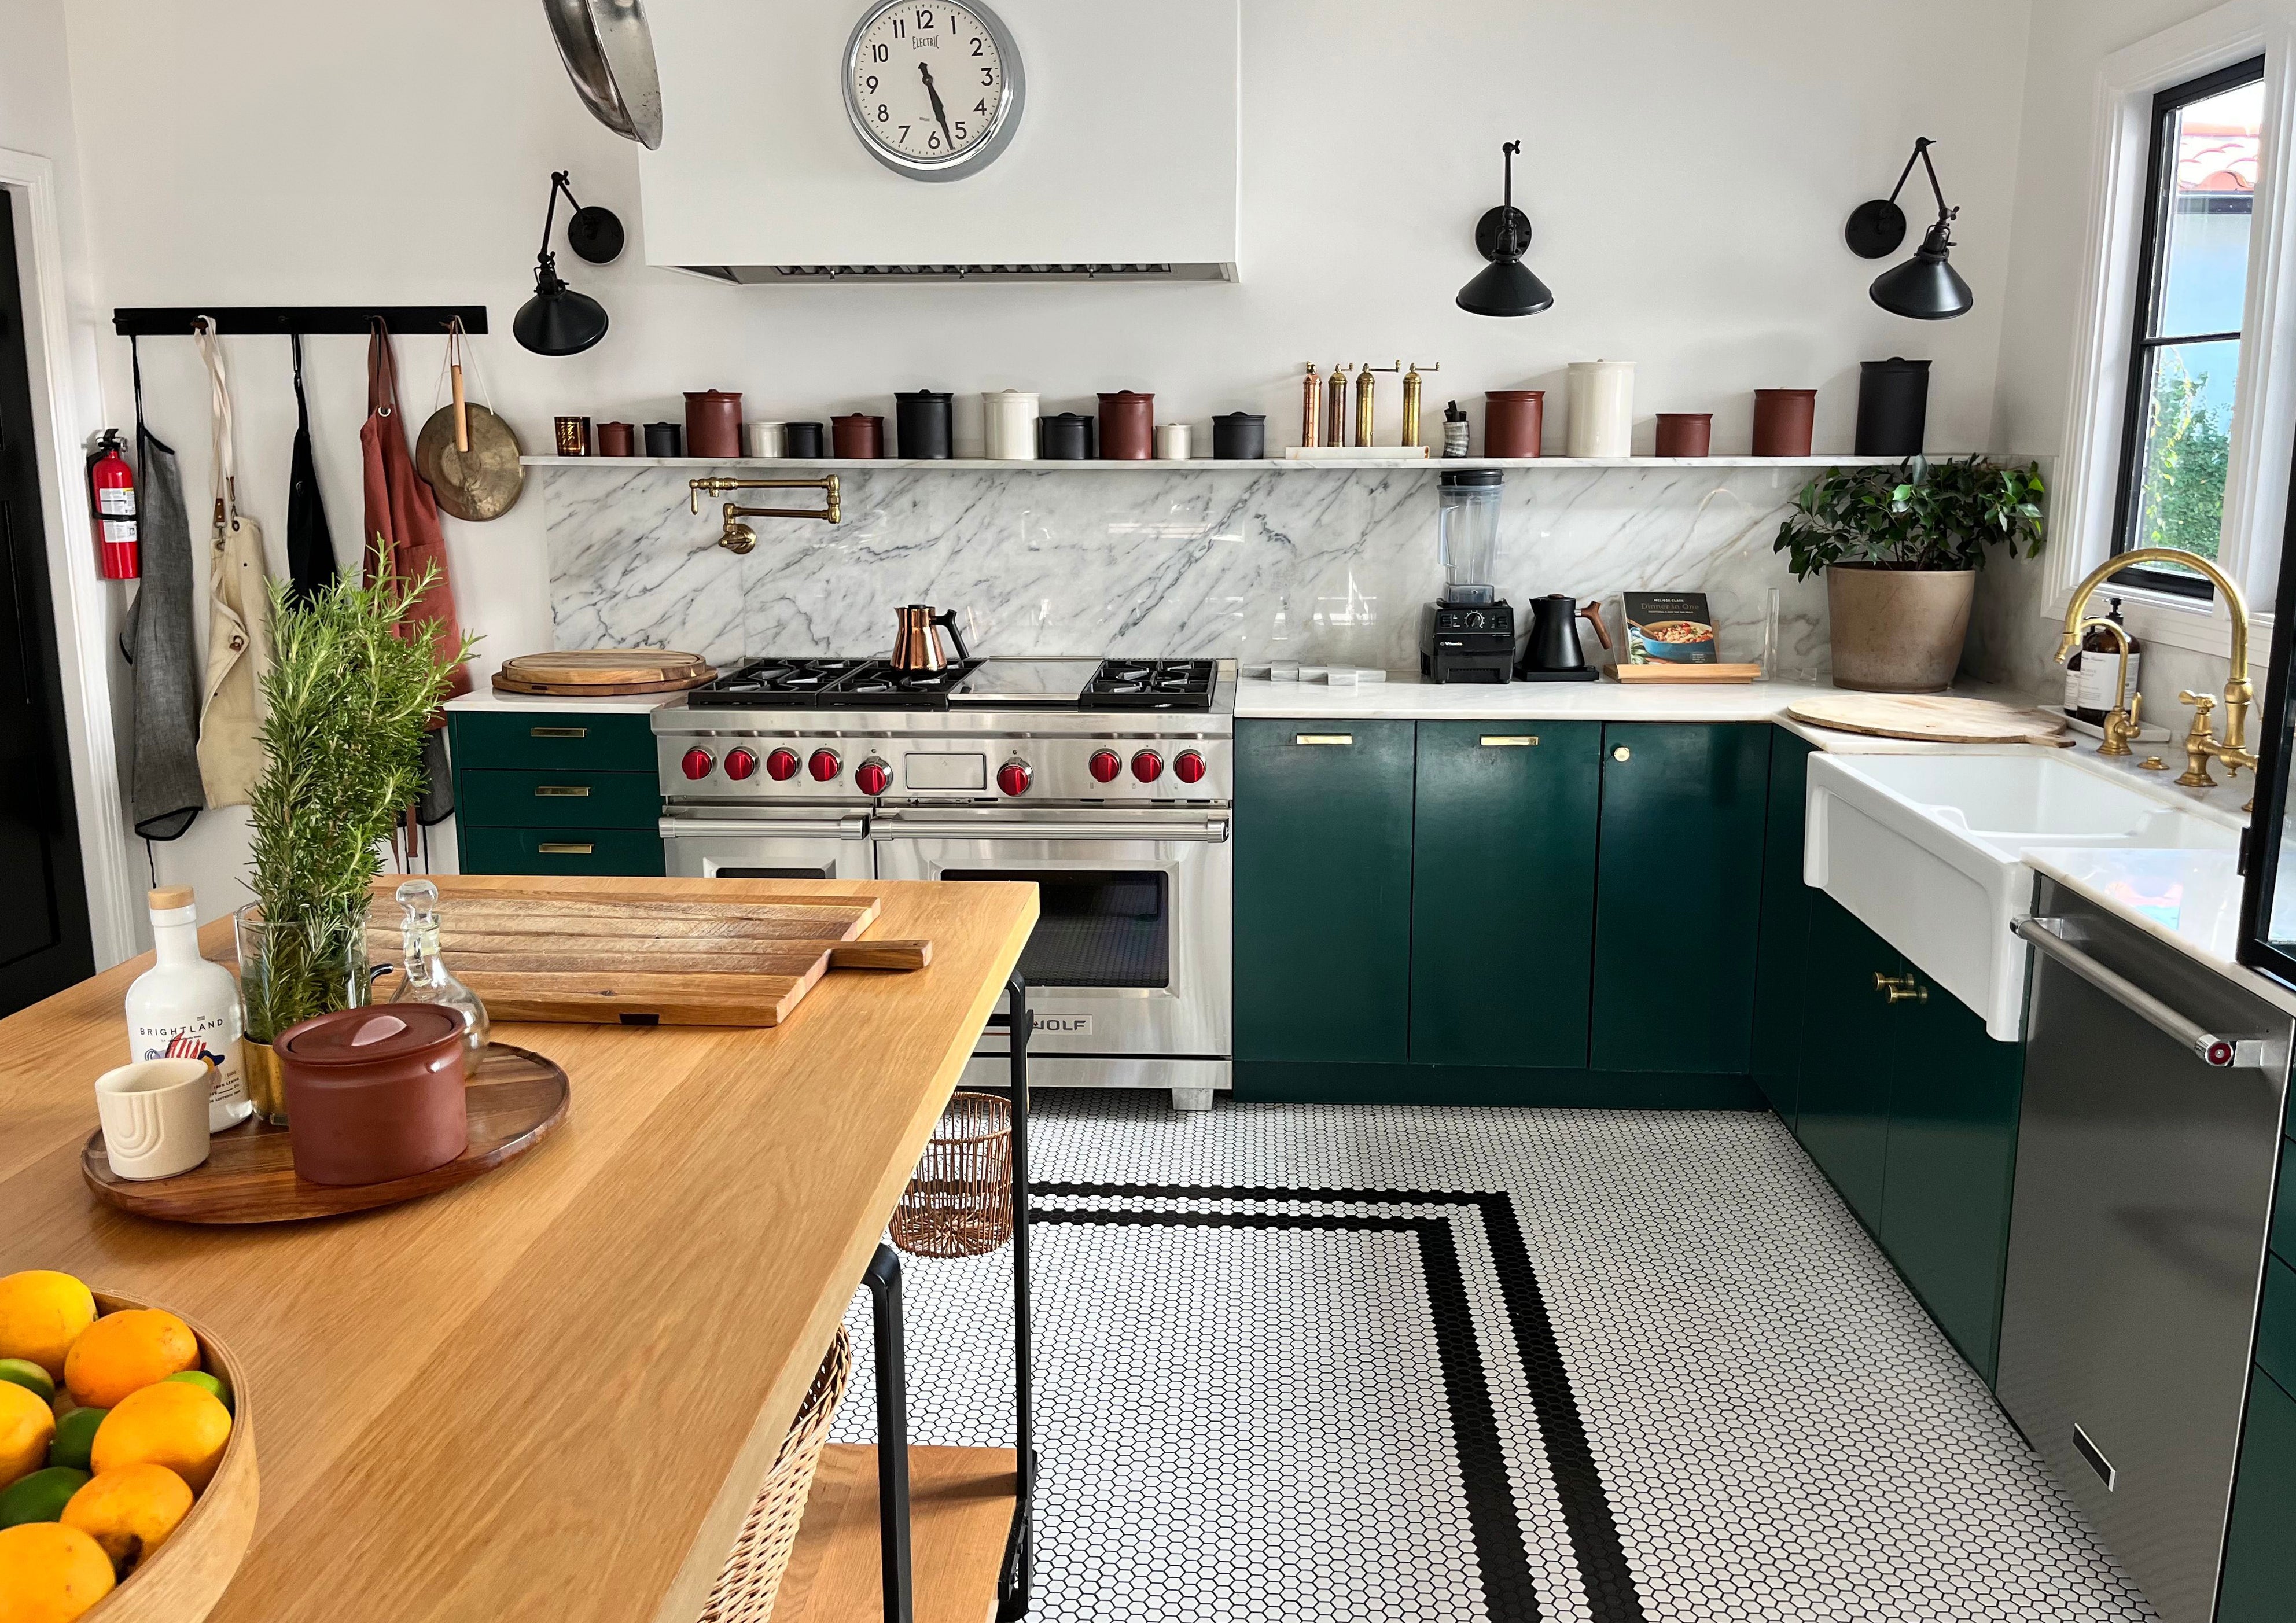 What makes a great kitchen?